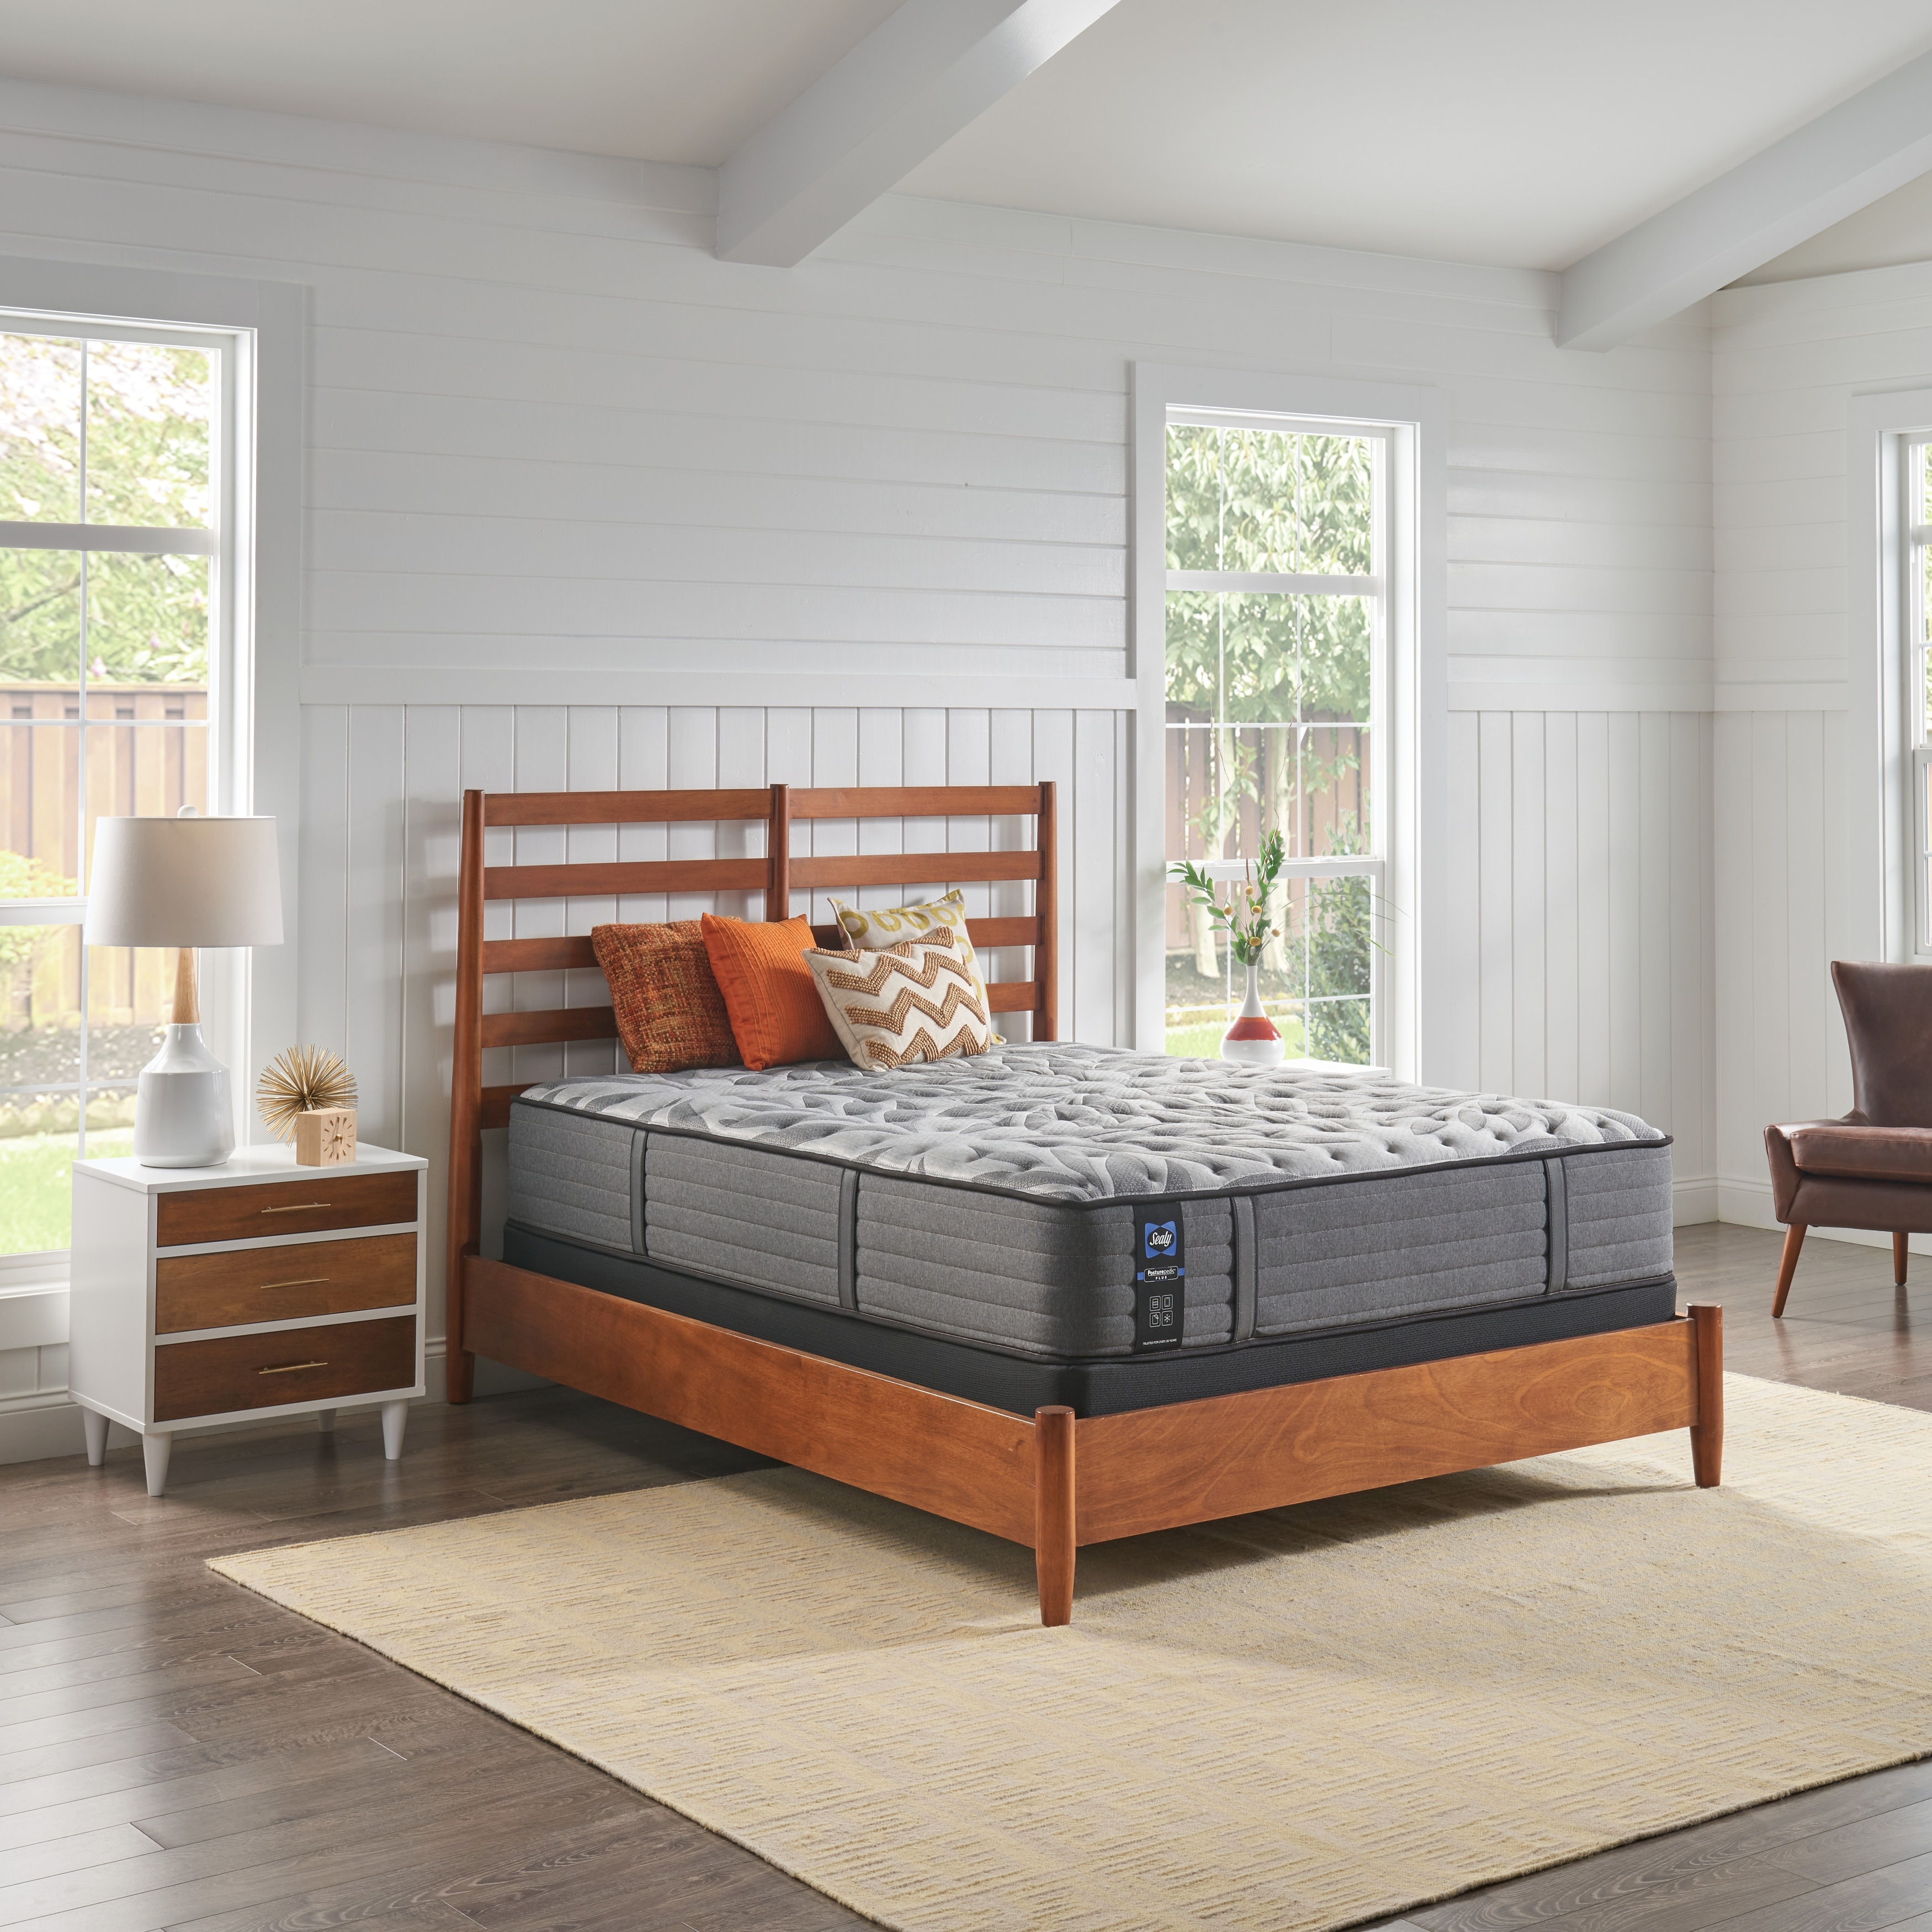 Extra Firm Sealy Innerspring Mattresses - Bed Bath & Beyond